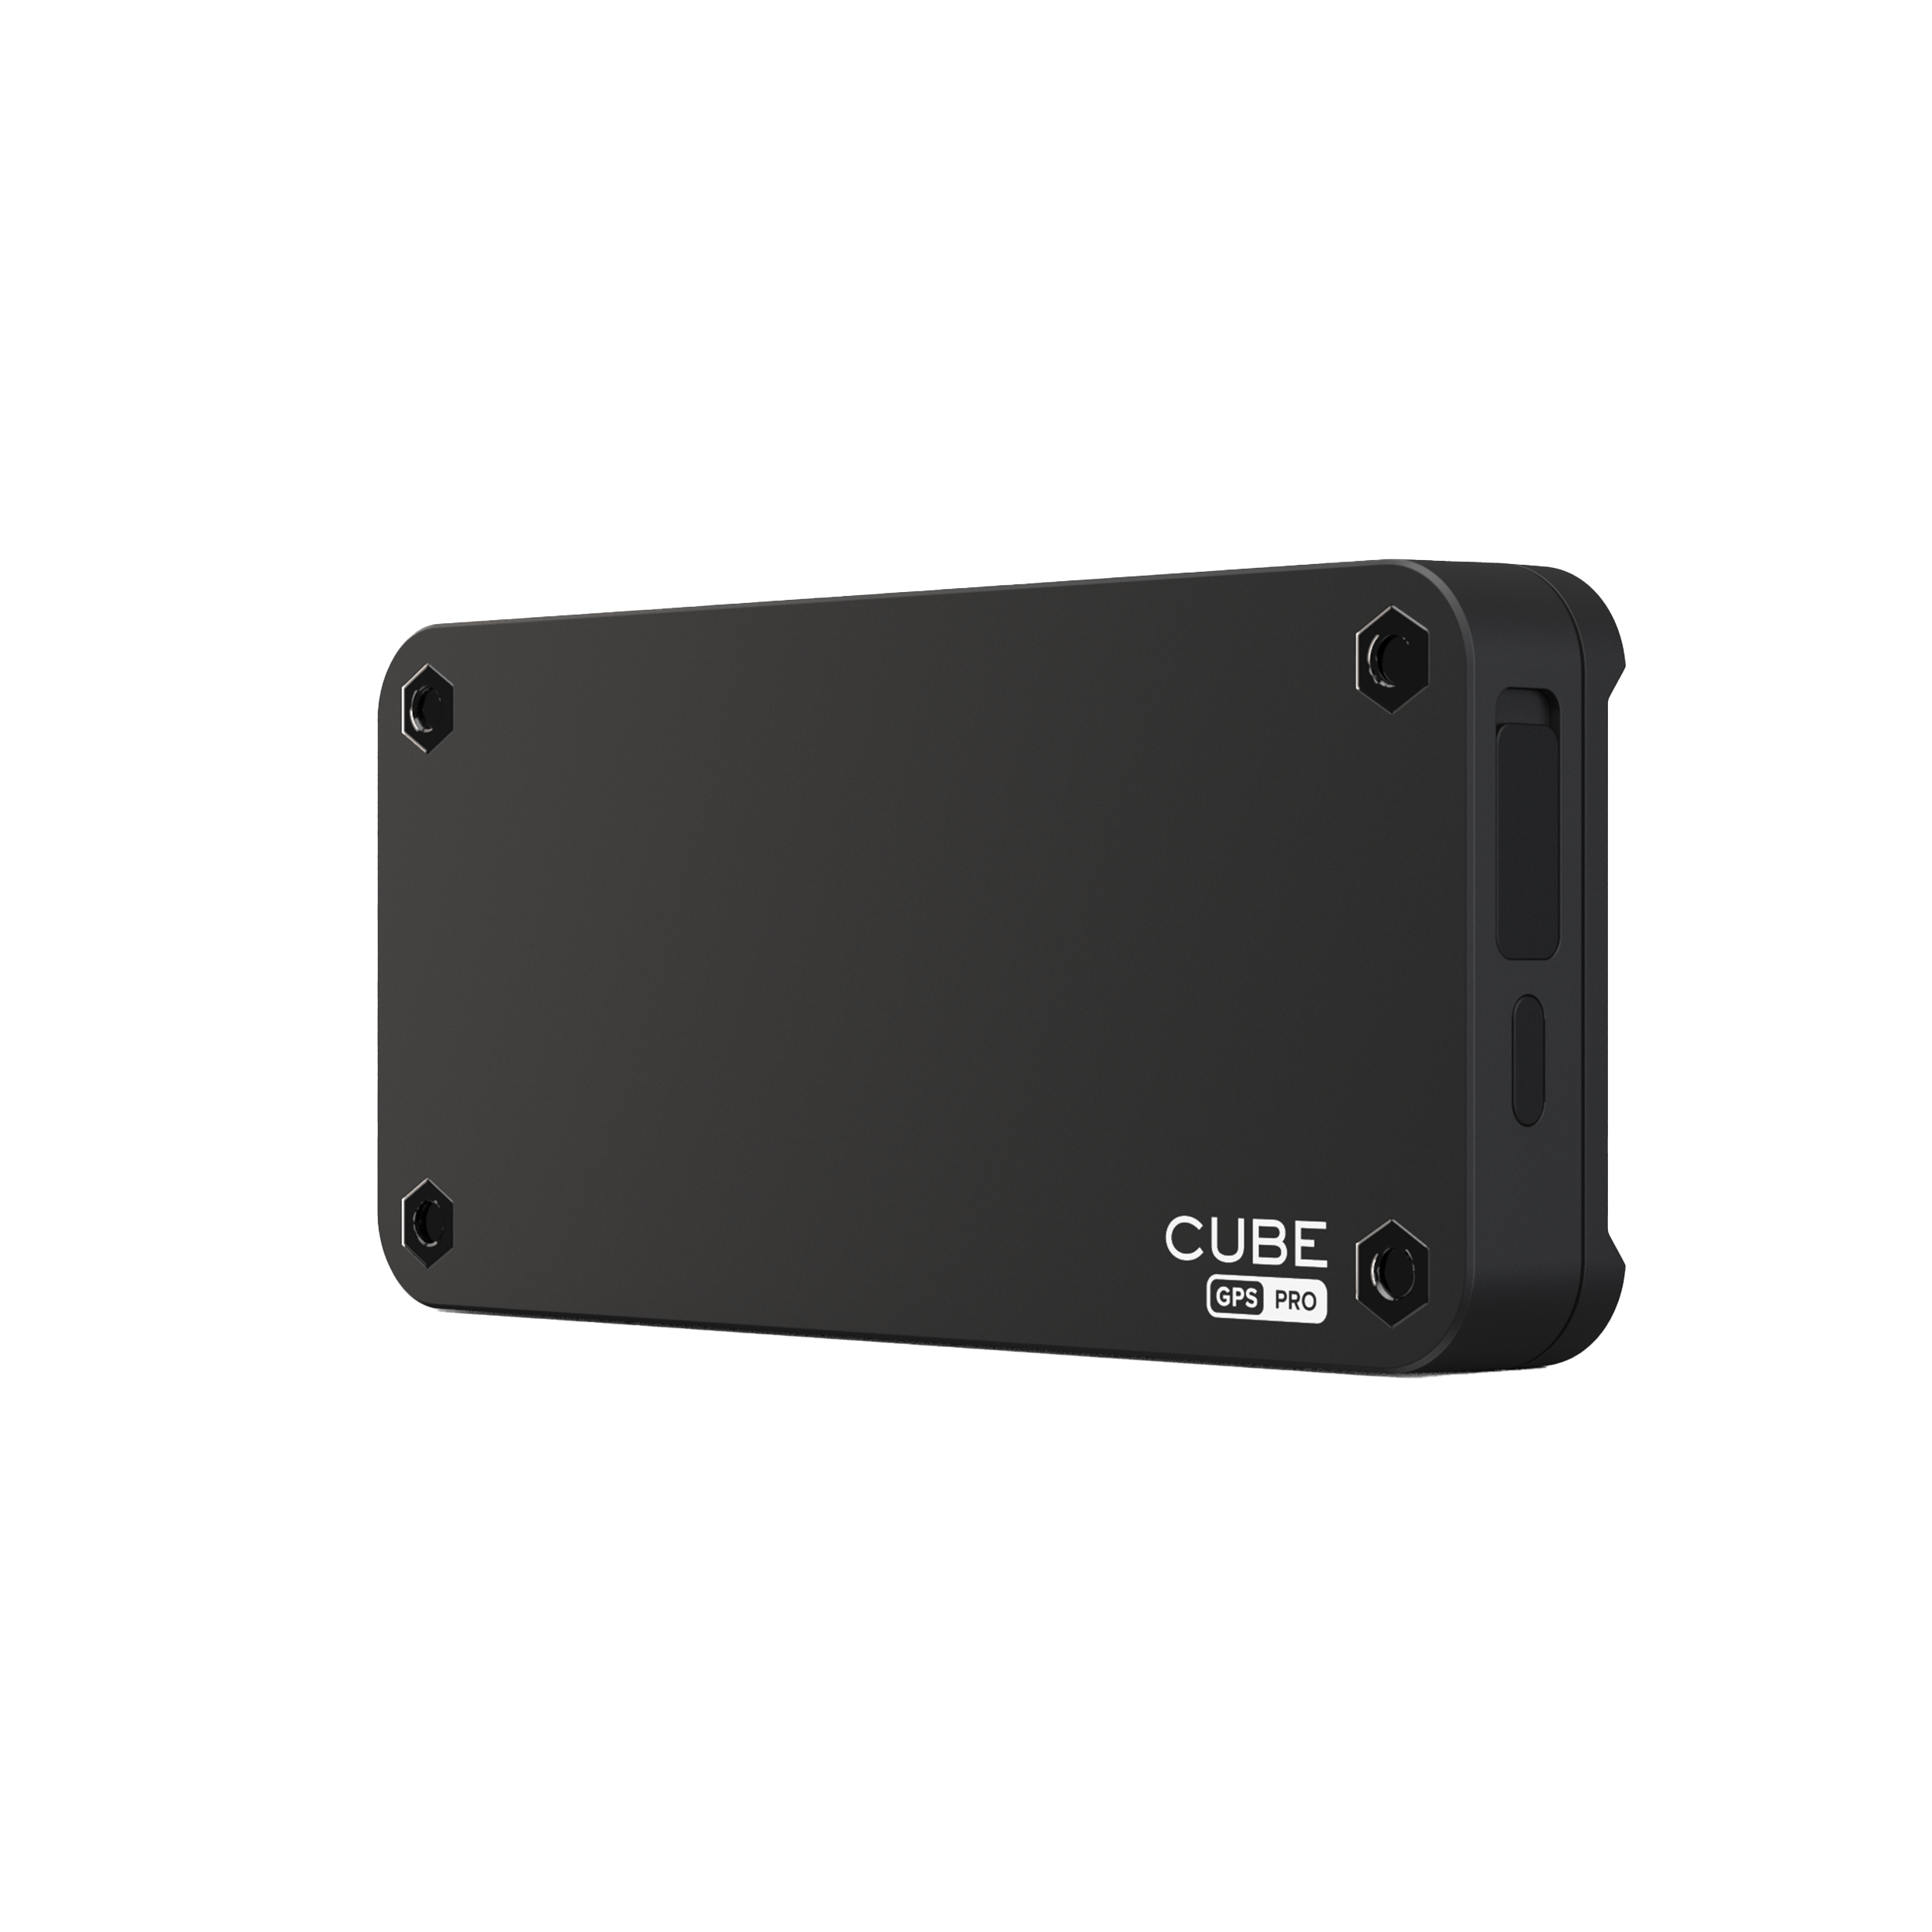 cube-gps-pro-side-2 (1).png